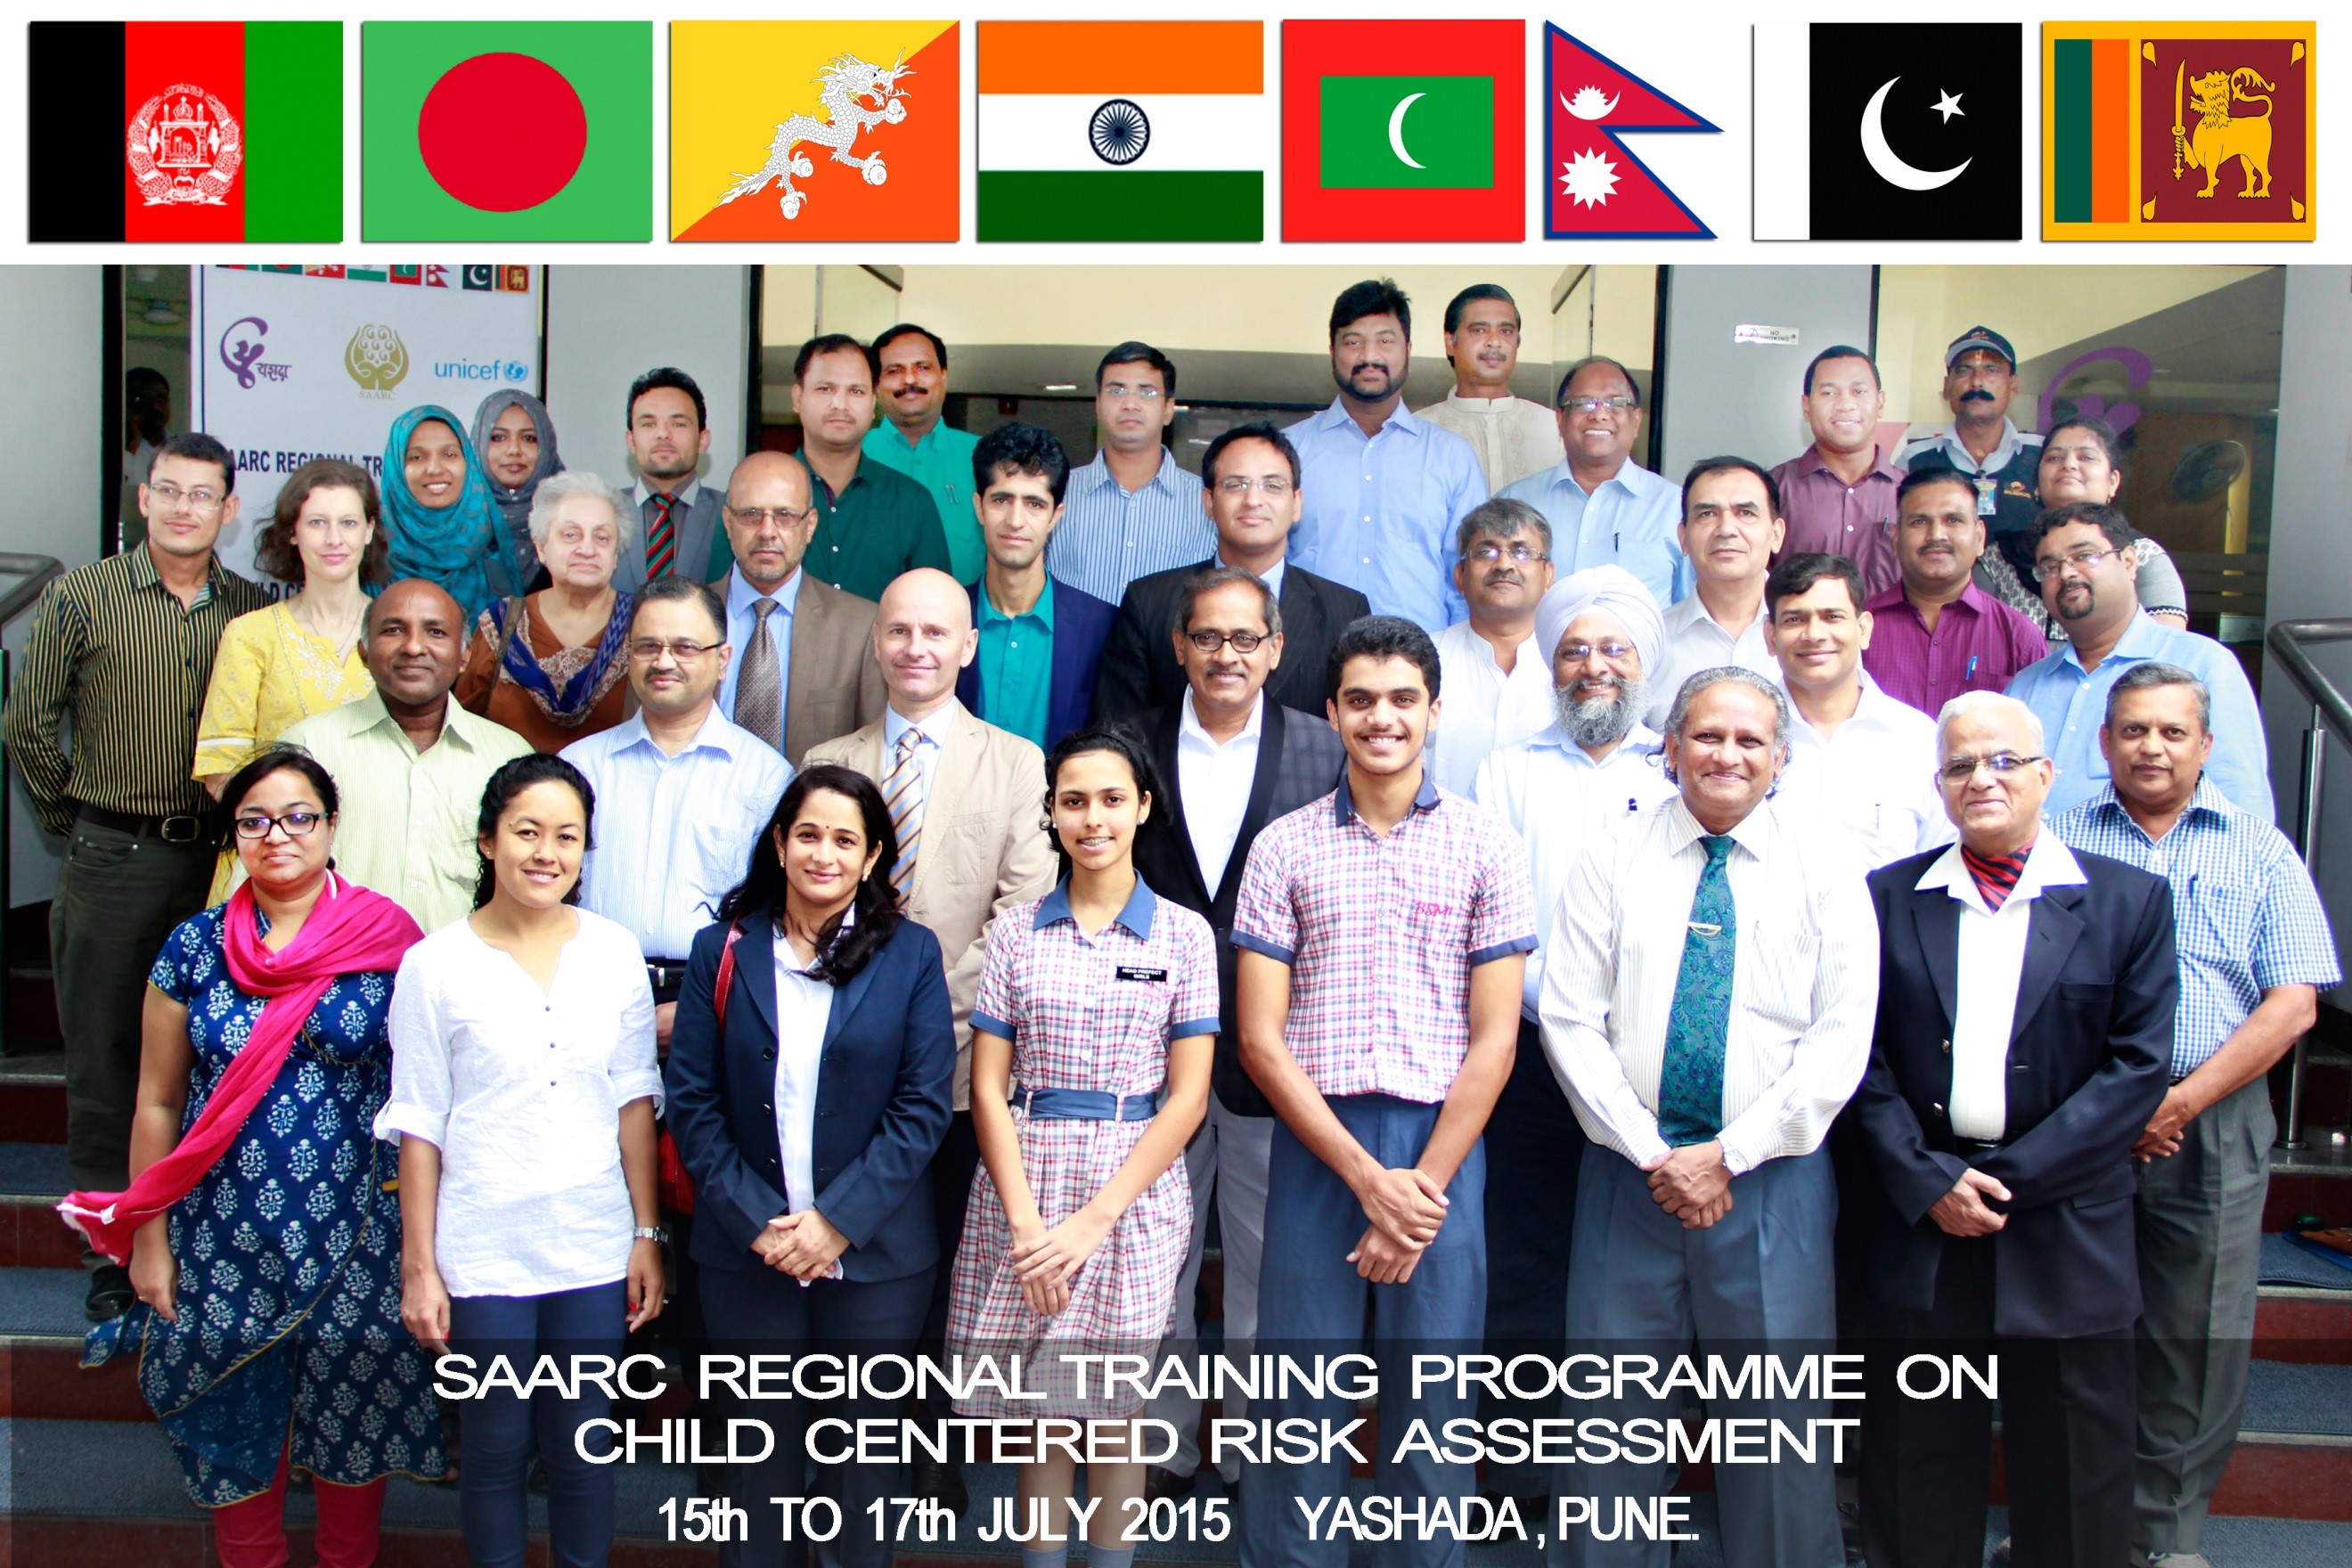 SAARC regional training programme on child centered risk assessment 15th to 17th July 2015 yashada, pune